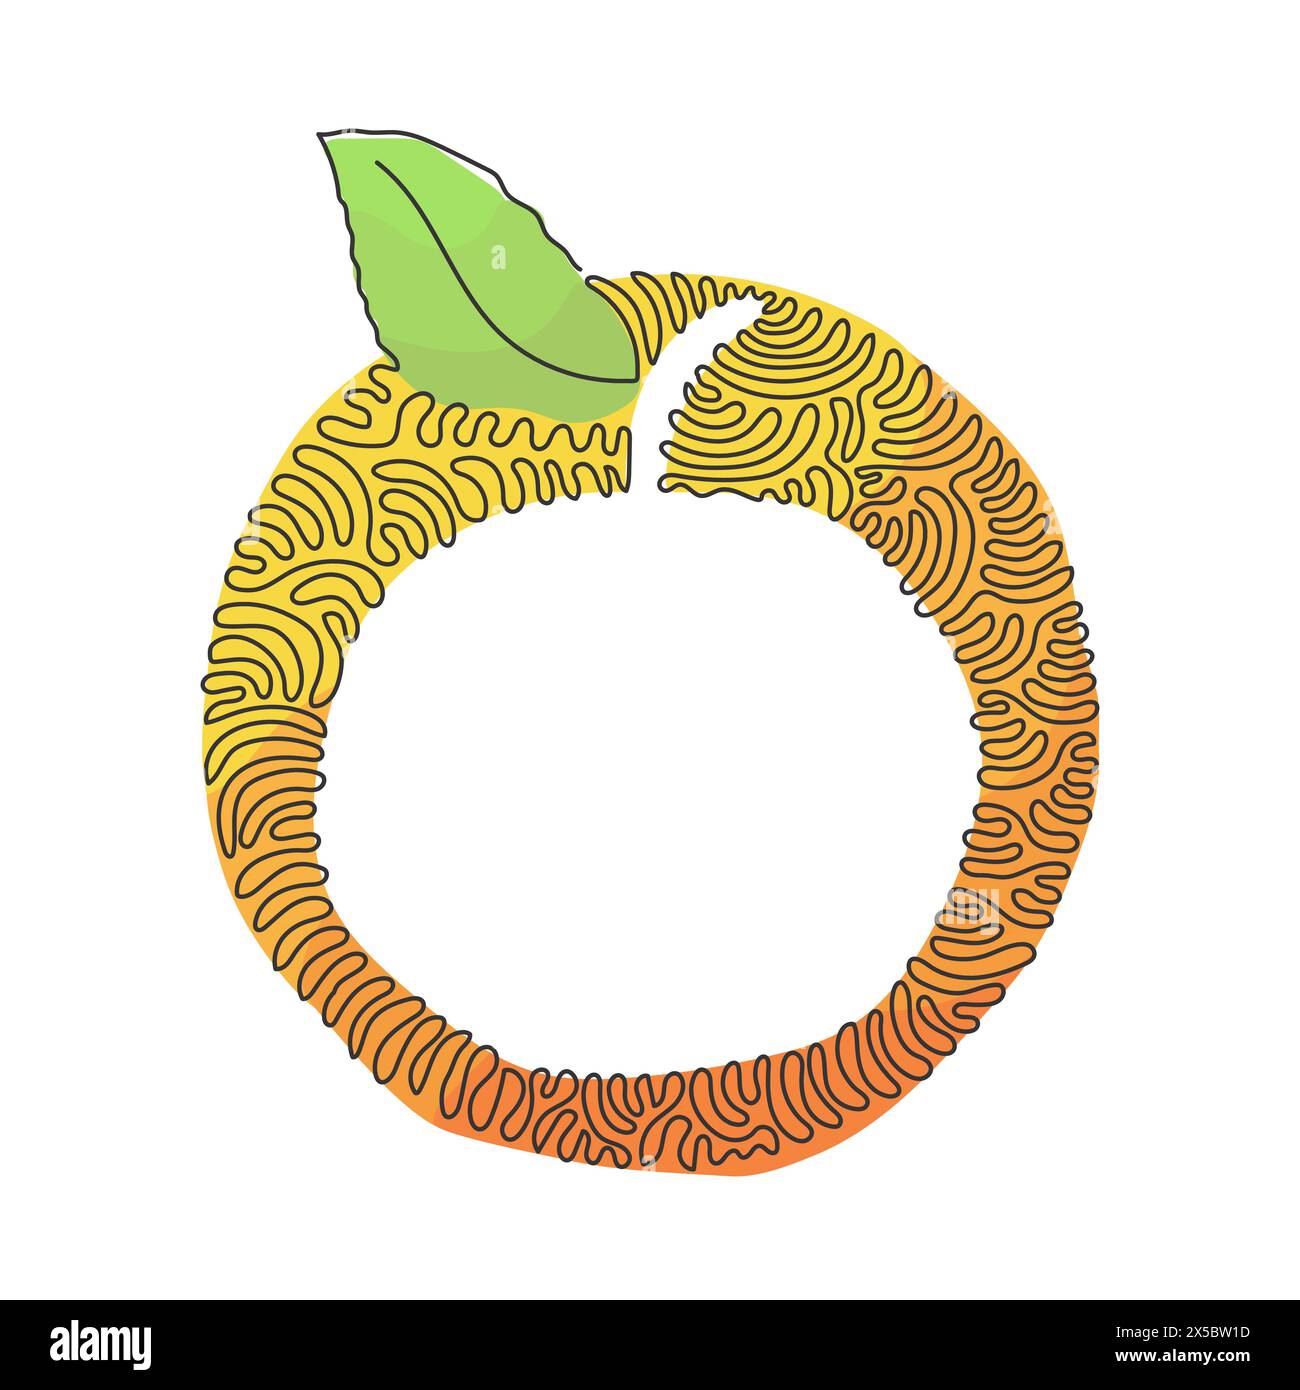 Single continuous line drawing whole healthy organic orange for orchard logo identity. Fresh tropical fruitage concept. Swirl curl circle background s Stock Vector